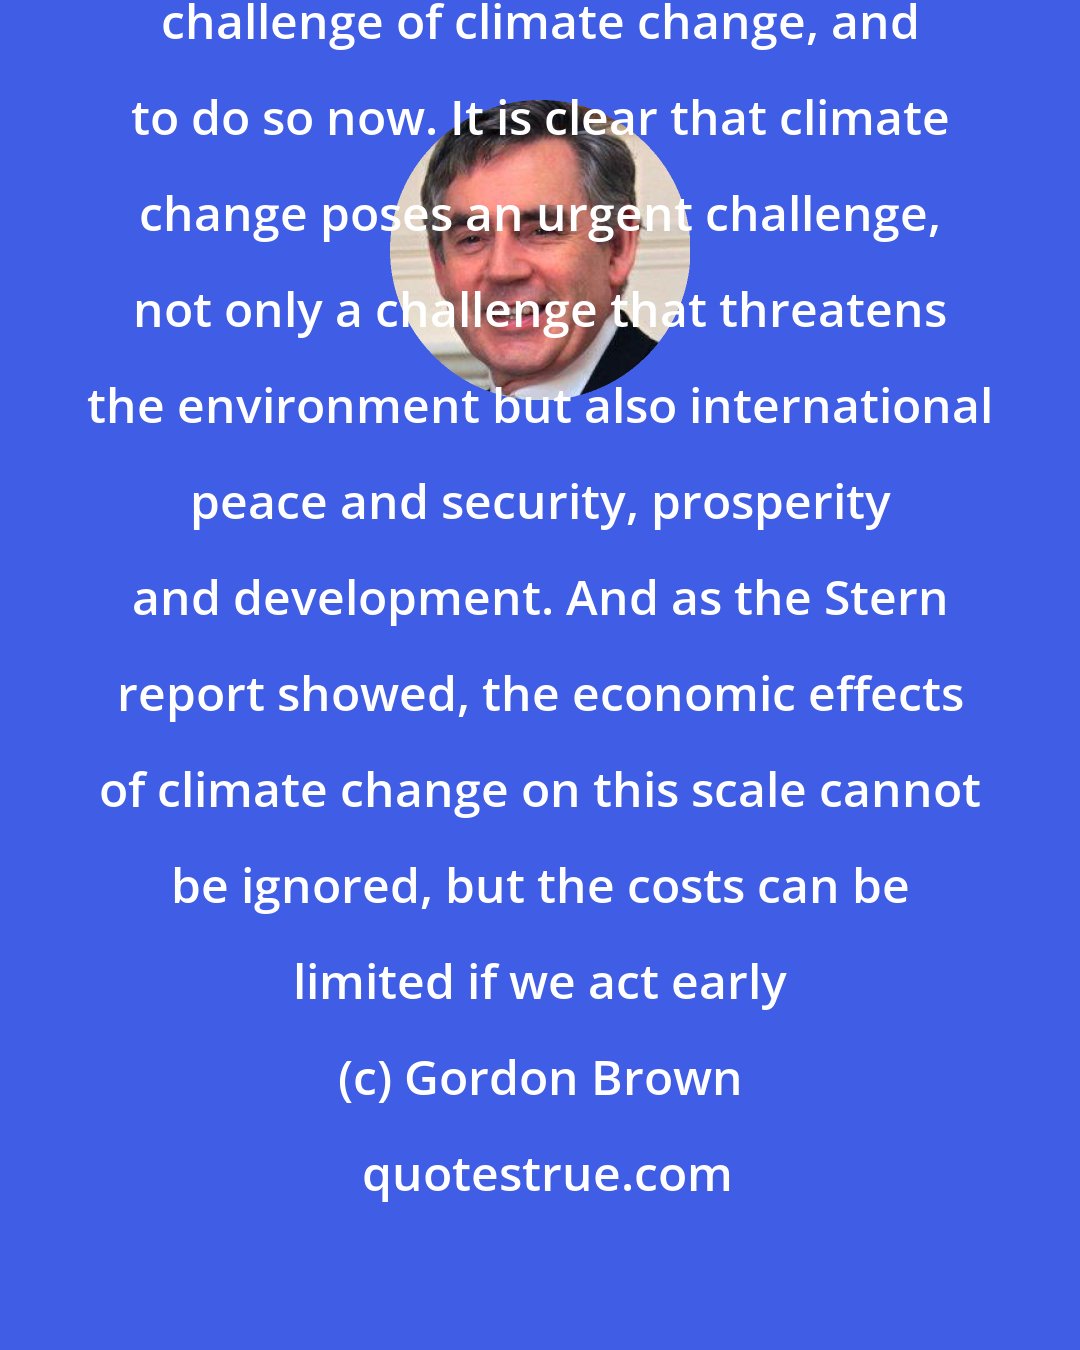 Gordon Brown: ...the world needs to face up to the challenge of climate change, and to do so now. It is clear that climate change poses an urgent challenge, not only a challenge that threatens the environment but also international peace and security, prosperity and development. And as the Stern report showed, the economic effects of climate change on this scale cannot be ignored, but the costs can be limited if we act early